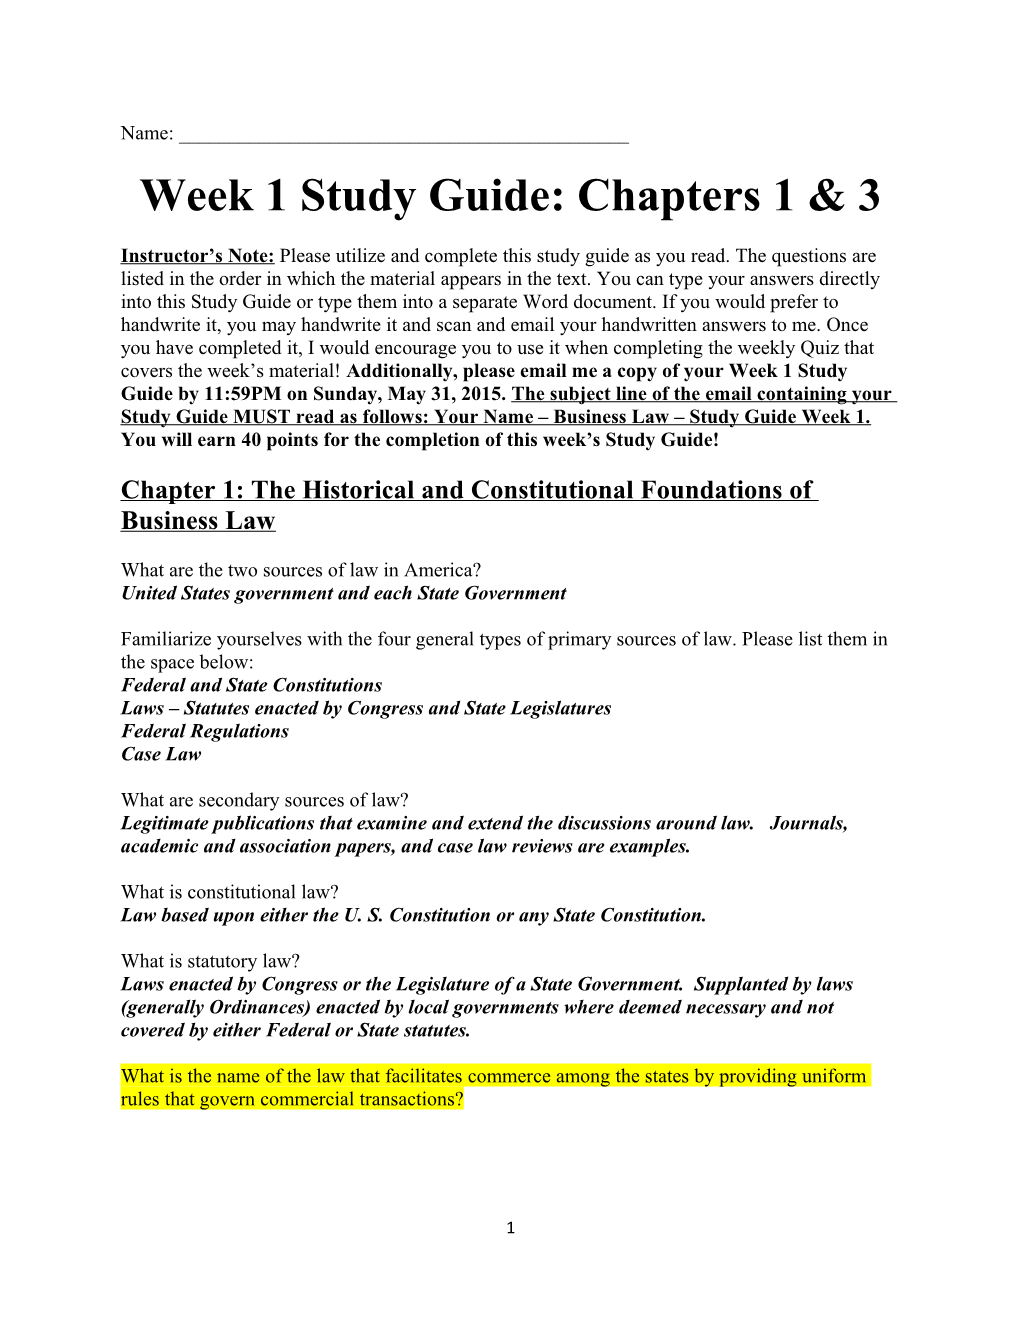 Week 1 Study Guide: Chapters 1 & 3